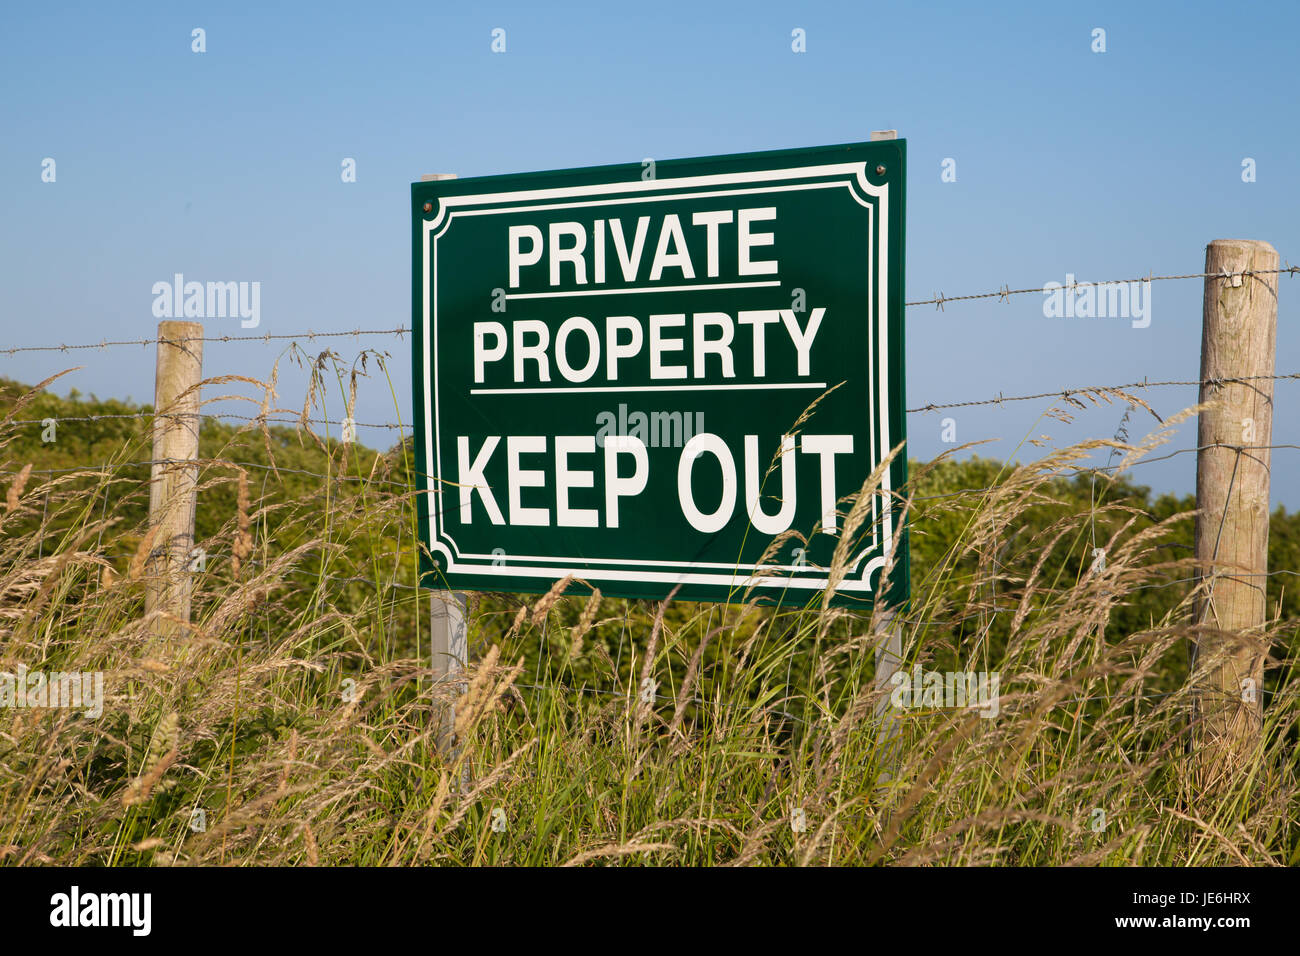 Private Property - Keep Out Sign Stock Photo